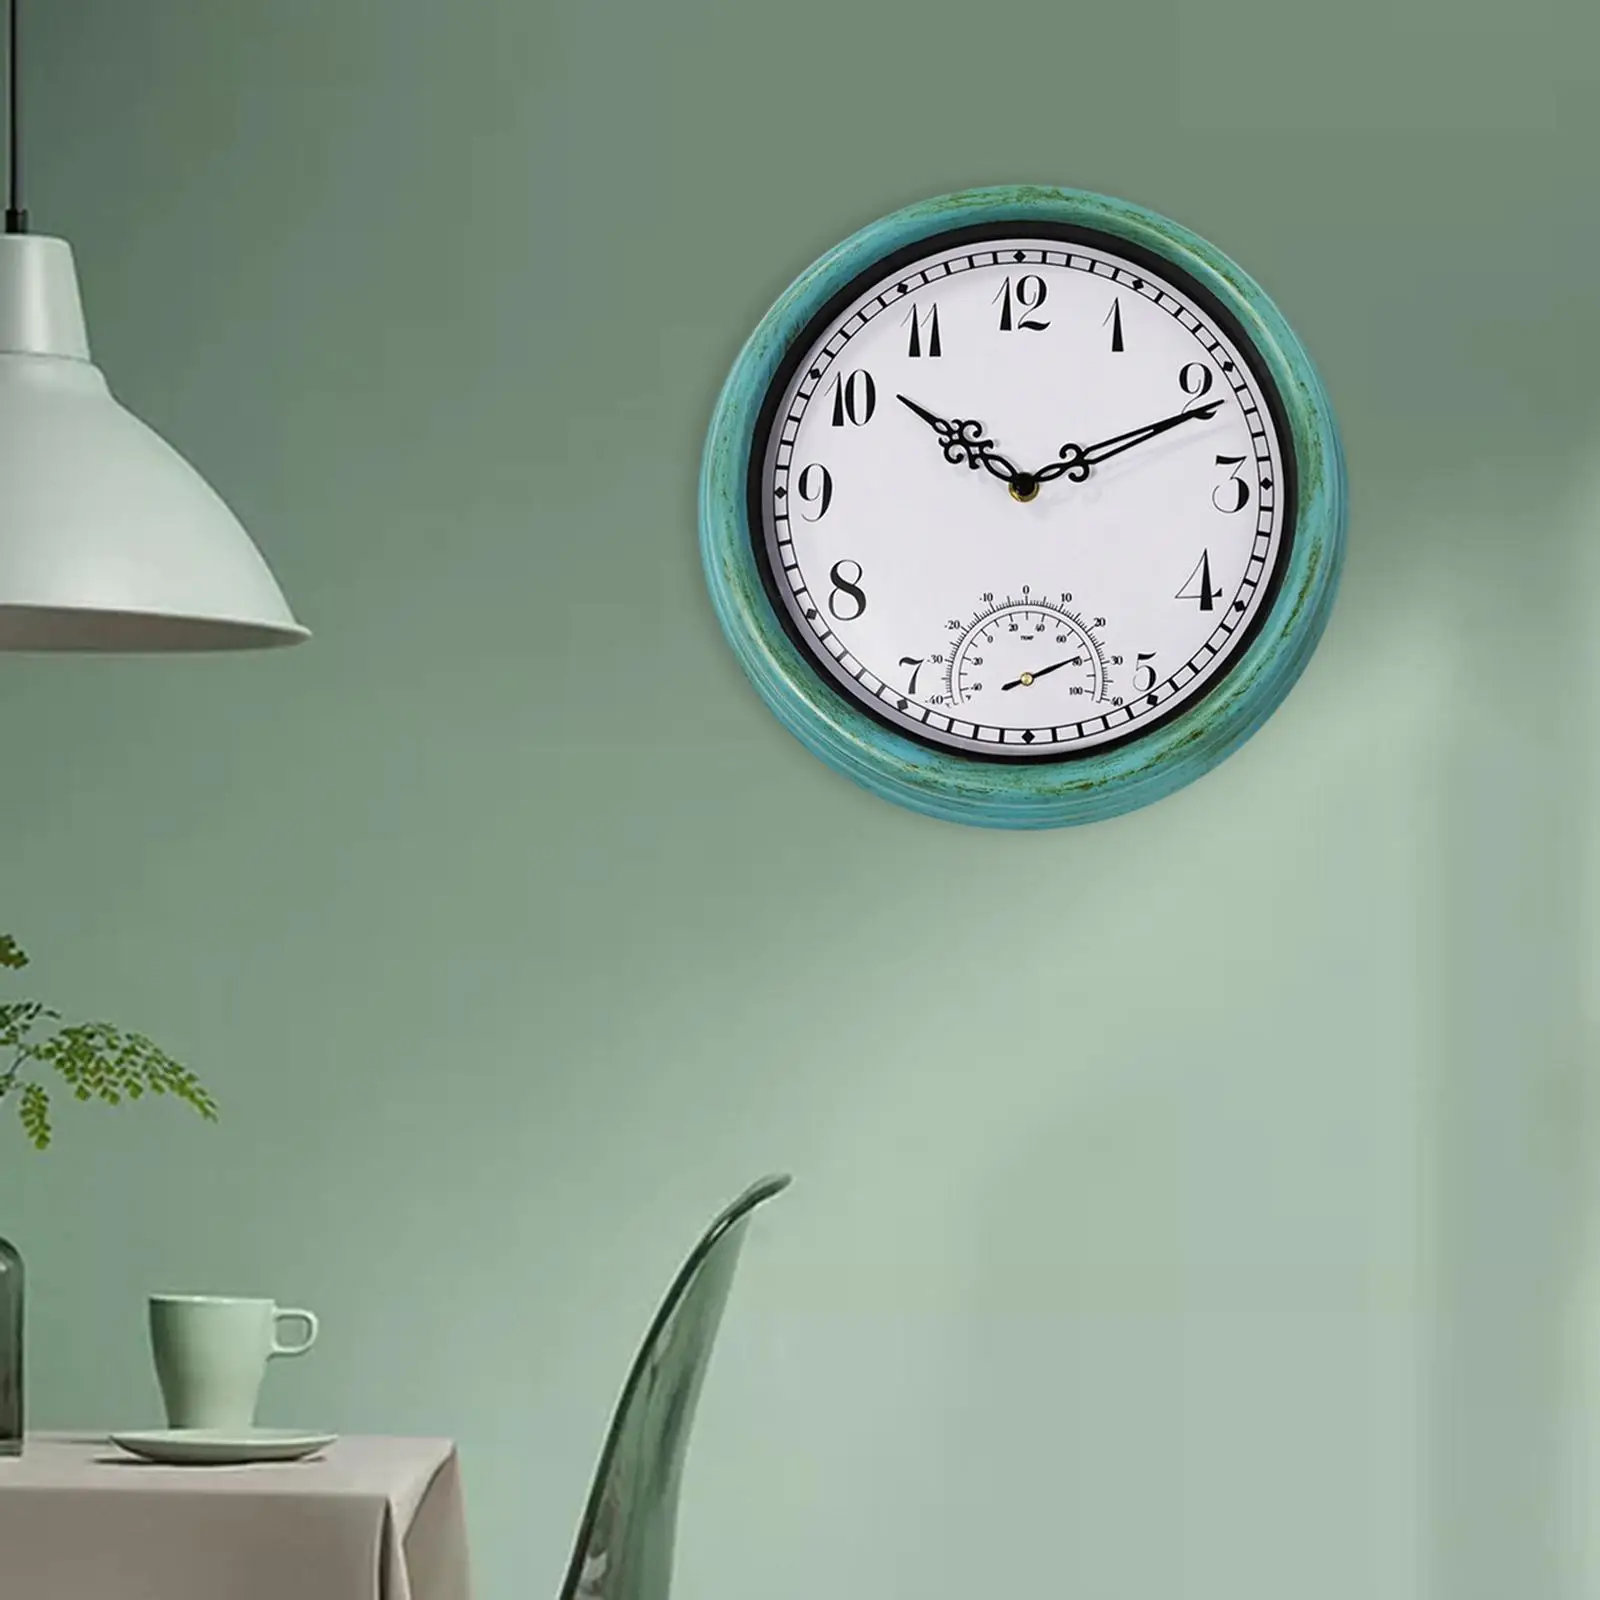 12 inch Wall Clock Silent with Temperature Waterproof Easily Read Indoor Outdoor Wall Clocks for Patio Fence Garden warehouse